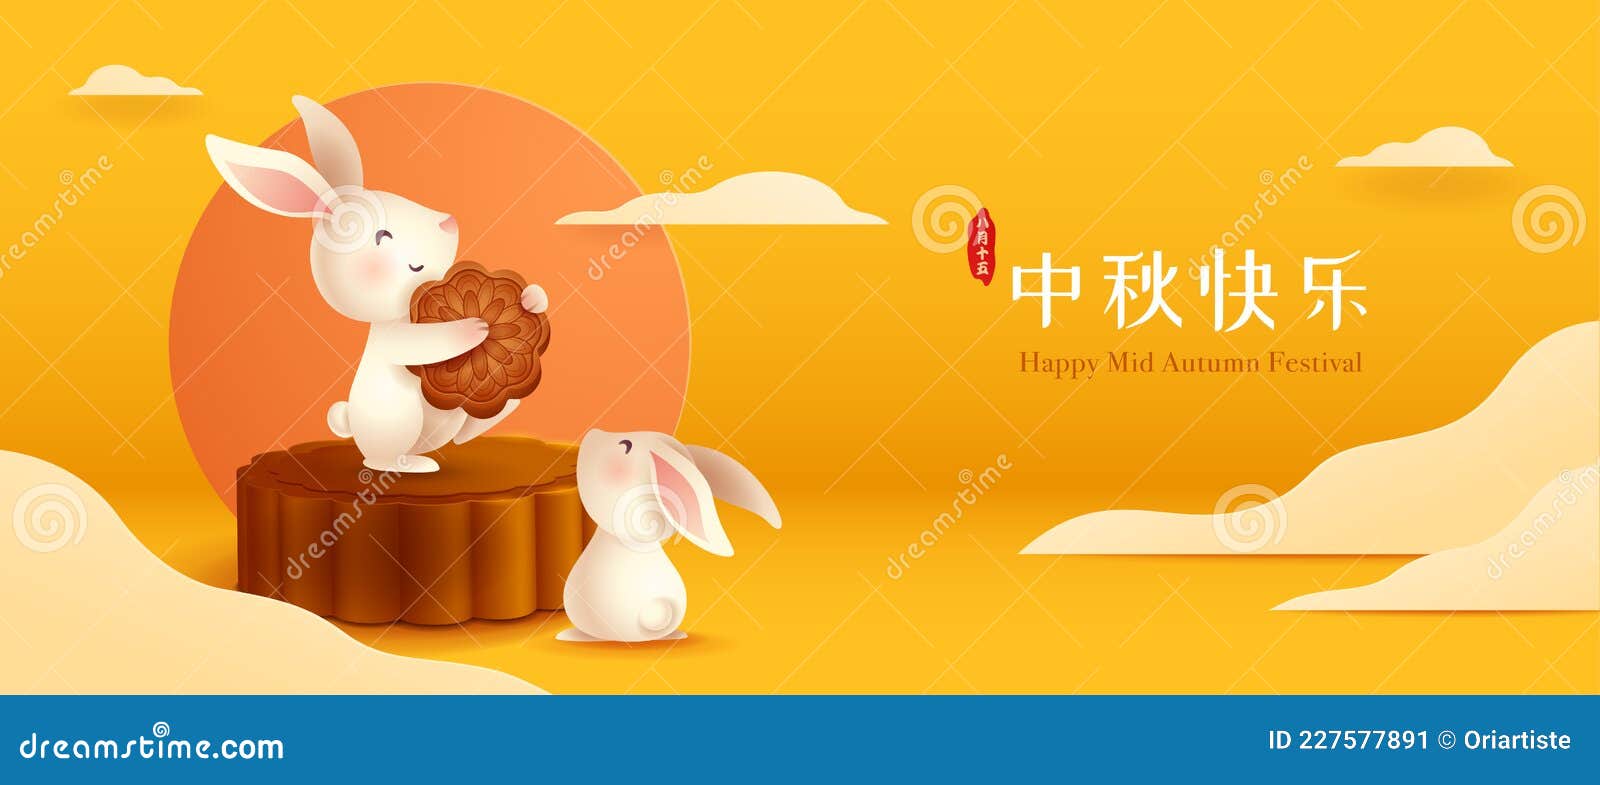 3d  of mid autumn mooncake festival theme with cute rabbit character on mooncake podium on paper graphic oriental clou